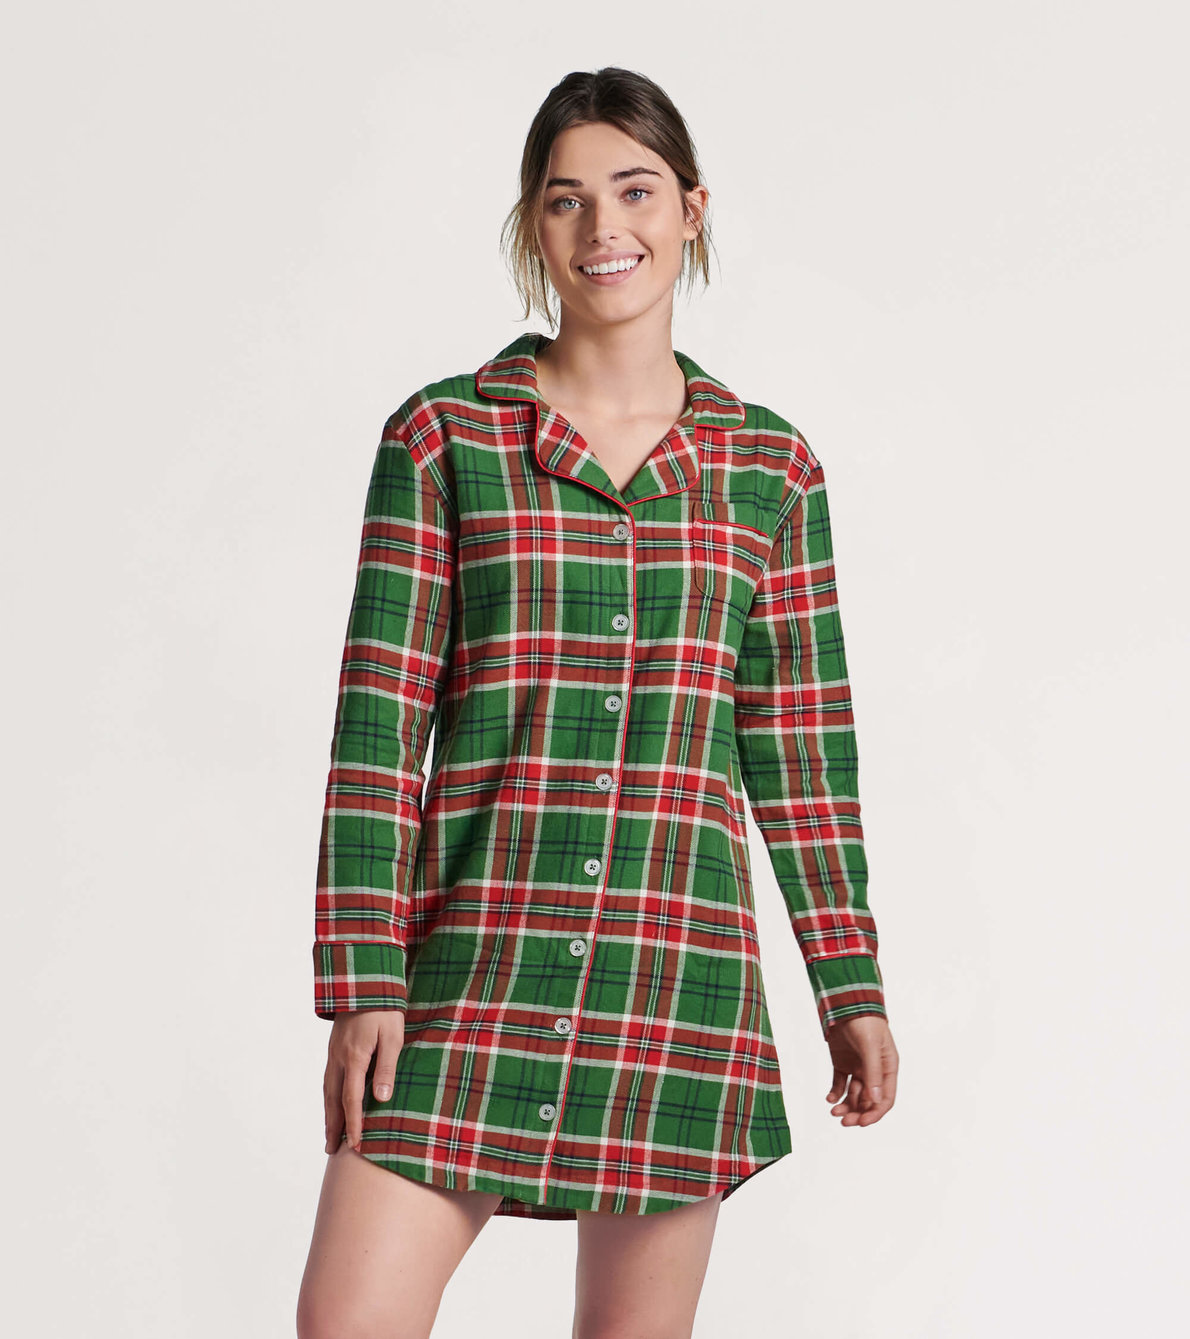 View larger image of Women's Country Christmas Plaid Flannel Nightgown